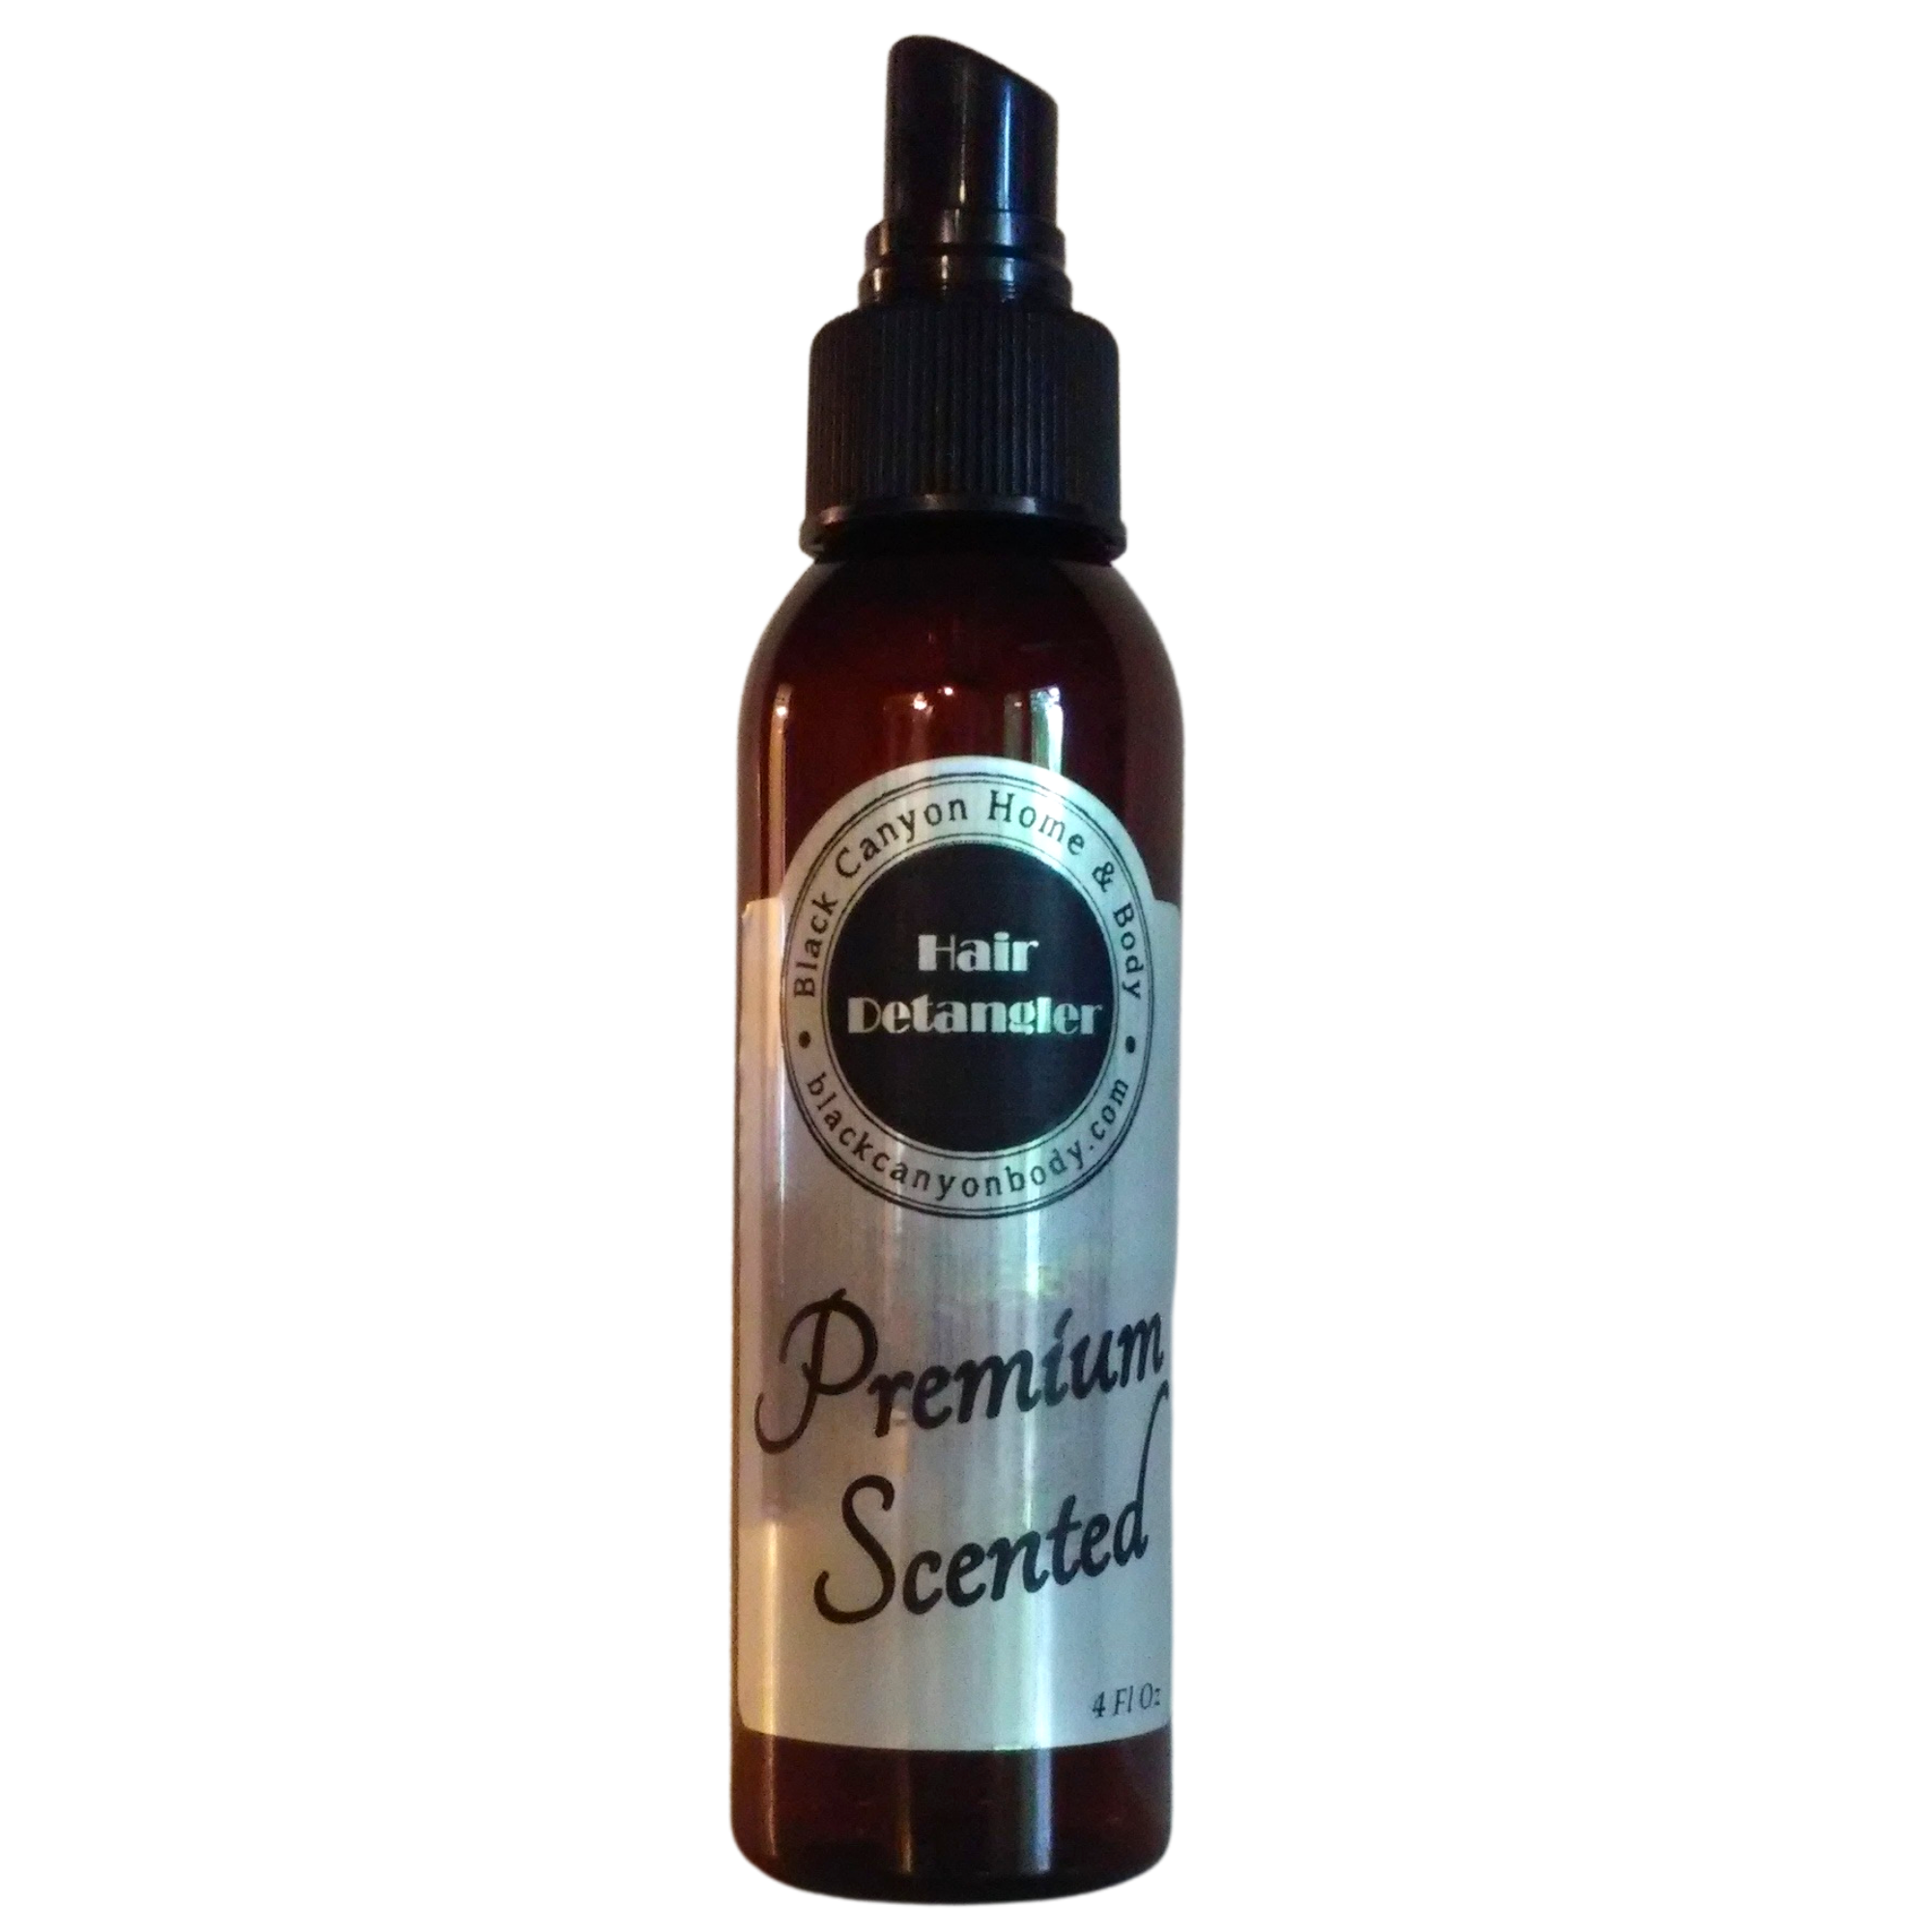 Black Canyon Coconut Cream Cupcake Scented Hair Detangler Spray with Olive Oil